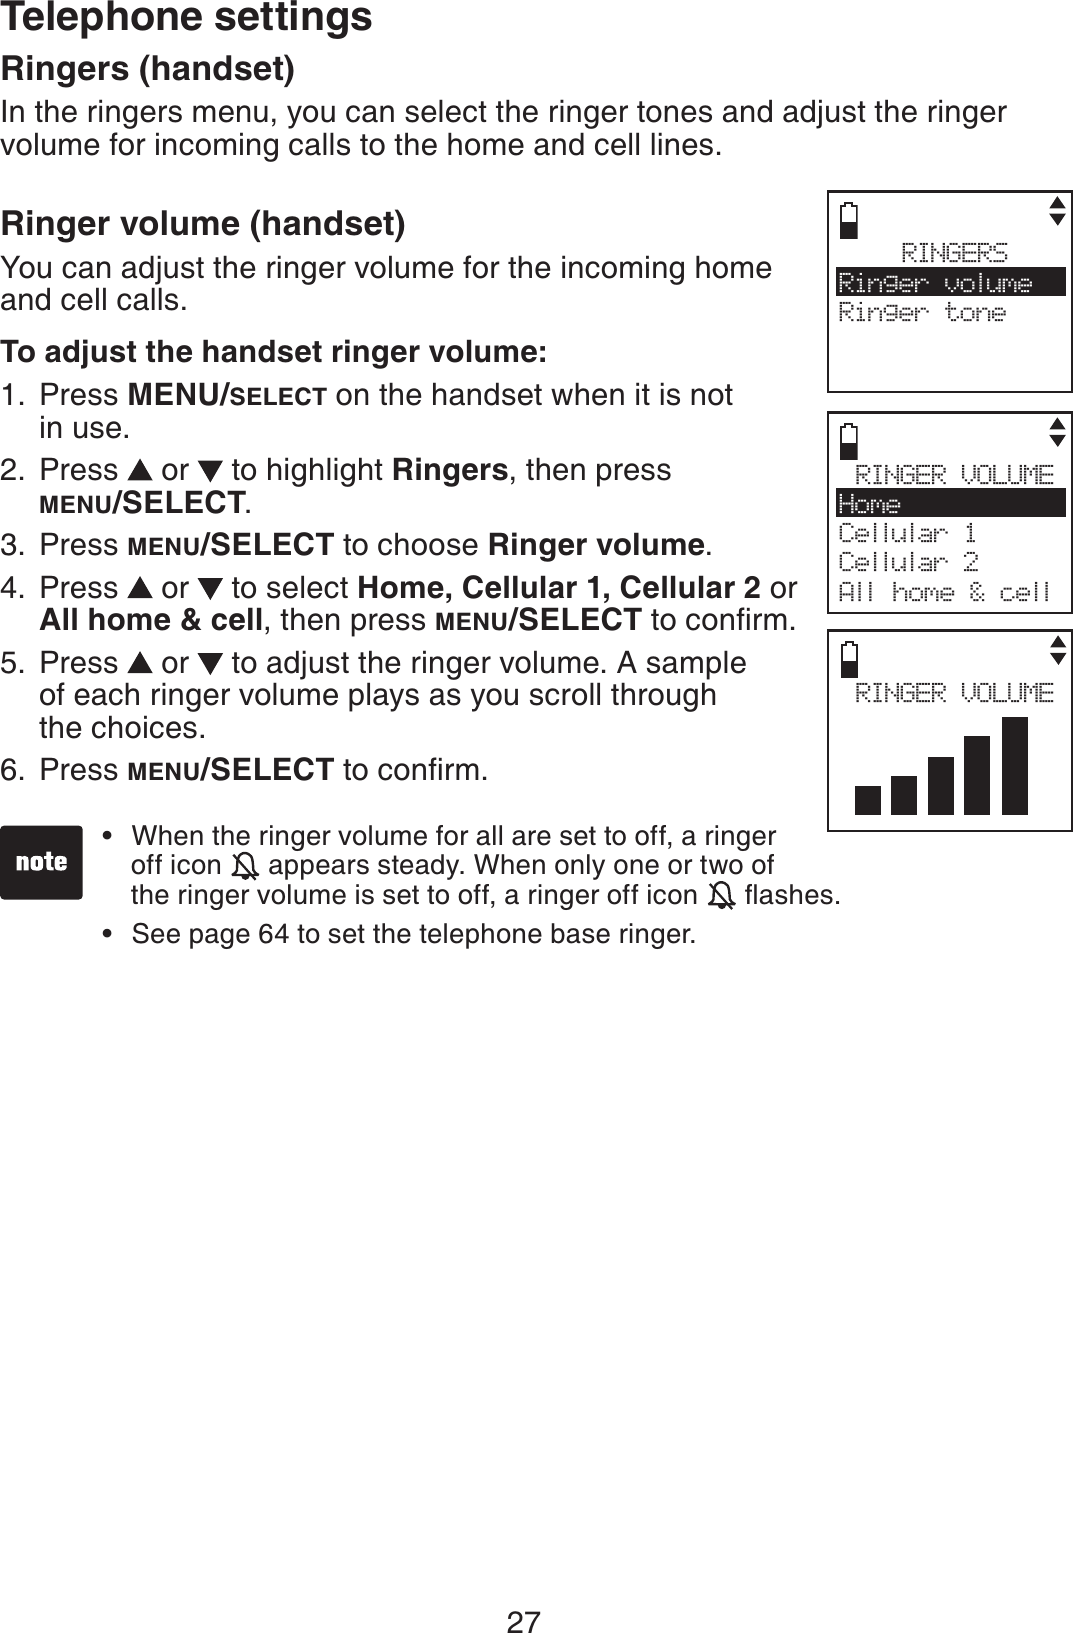 27Ringers (handset)In the ringers menu, you can select the ringer tones and adjust the ringer volume for incoming calls to the home and cell lines.Ringer volume (handset)You can adjust the ringer volume for the incoming home and cell calls.To adjust the handset ringer volume:Press MENU/SELECT on the handset when it is not in use.Press   or   to highlight Ringers, then press MENU/SELECT.Press MENU/SELECT to choose Ringer volume.Press   or   to select Home, Cellular 1, Cellular 2 or All home &amp; cell, then press MENU/SELECTVQEQPſTOPress   or   to adjust the ringer volume. A sample of each ringer volume plays as you scroll through the choices.Press MENU/SELECTVQEQPſTO1.2.3.4.5.6.RINGERSRinger volumeRinger toneRINGER VOLUMEHomeCellular 1Cellular 2All home &amp; cellWhen the ringer volume for all are set to off, a ringer off icon   appears steady. When only one or two of      the ringer volume is set to off, a ringer off icon  ƀCUJGUSee page 64 to set the telephone base ringer.••RINGER VOLUMETelephone settings